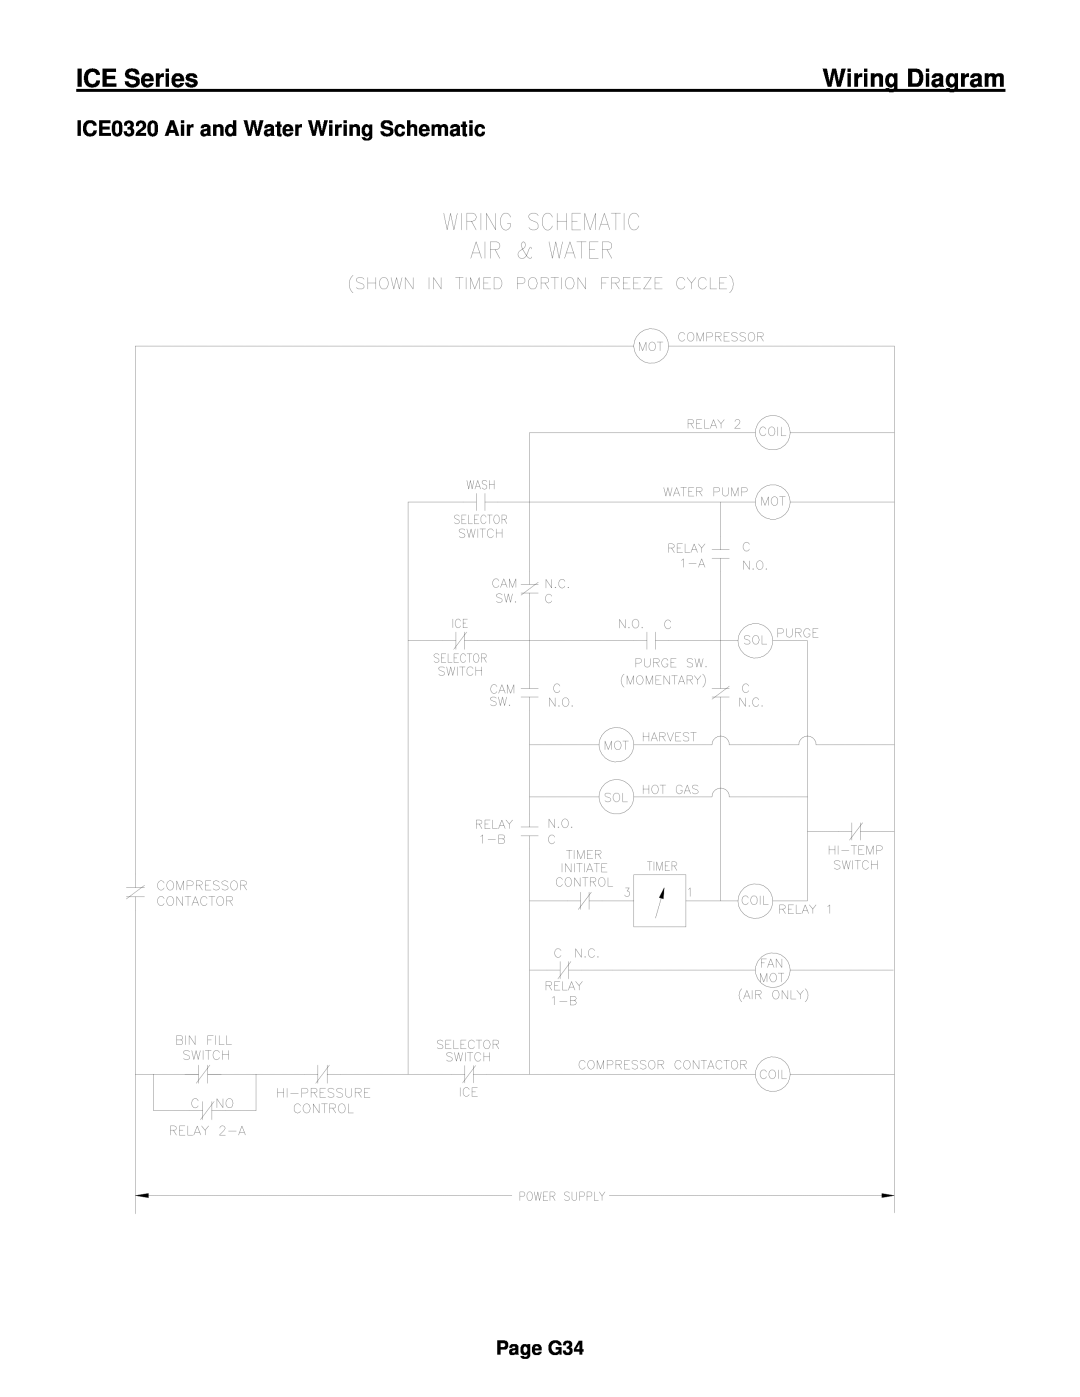 Ice-O-Matic ICE0250 Series installation manual ICE0320 Air and Water Wiring Schematic, ICE Series, Wiring Diagram, Page G34 